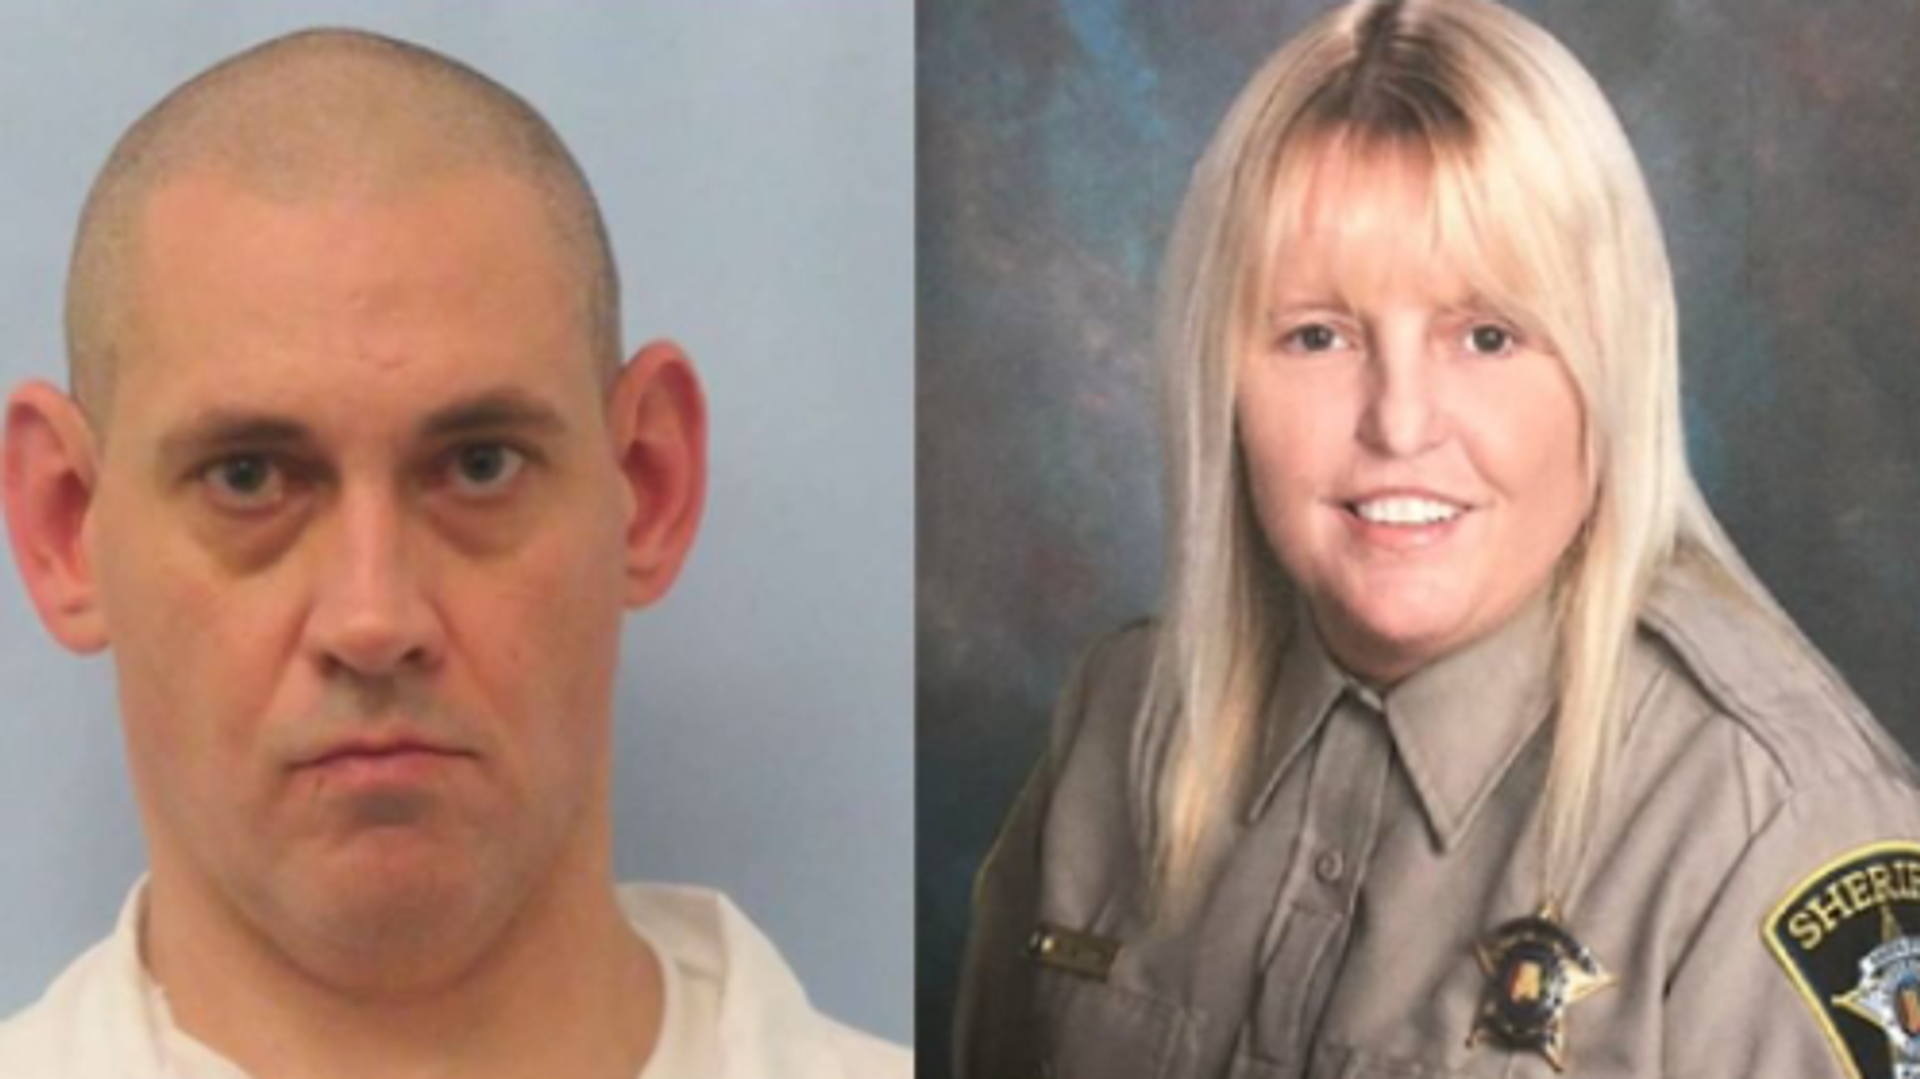 The U.S. Marshals Service is offering up to $10,000 for information leading to the capture of an escaped inmate from Lauderdale County Jail, and the location of a missing and endangered correctional officer from Lauderdale County, Alabama on Friday April, 29. - Sputnik International, 1920, 02.05.2022